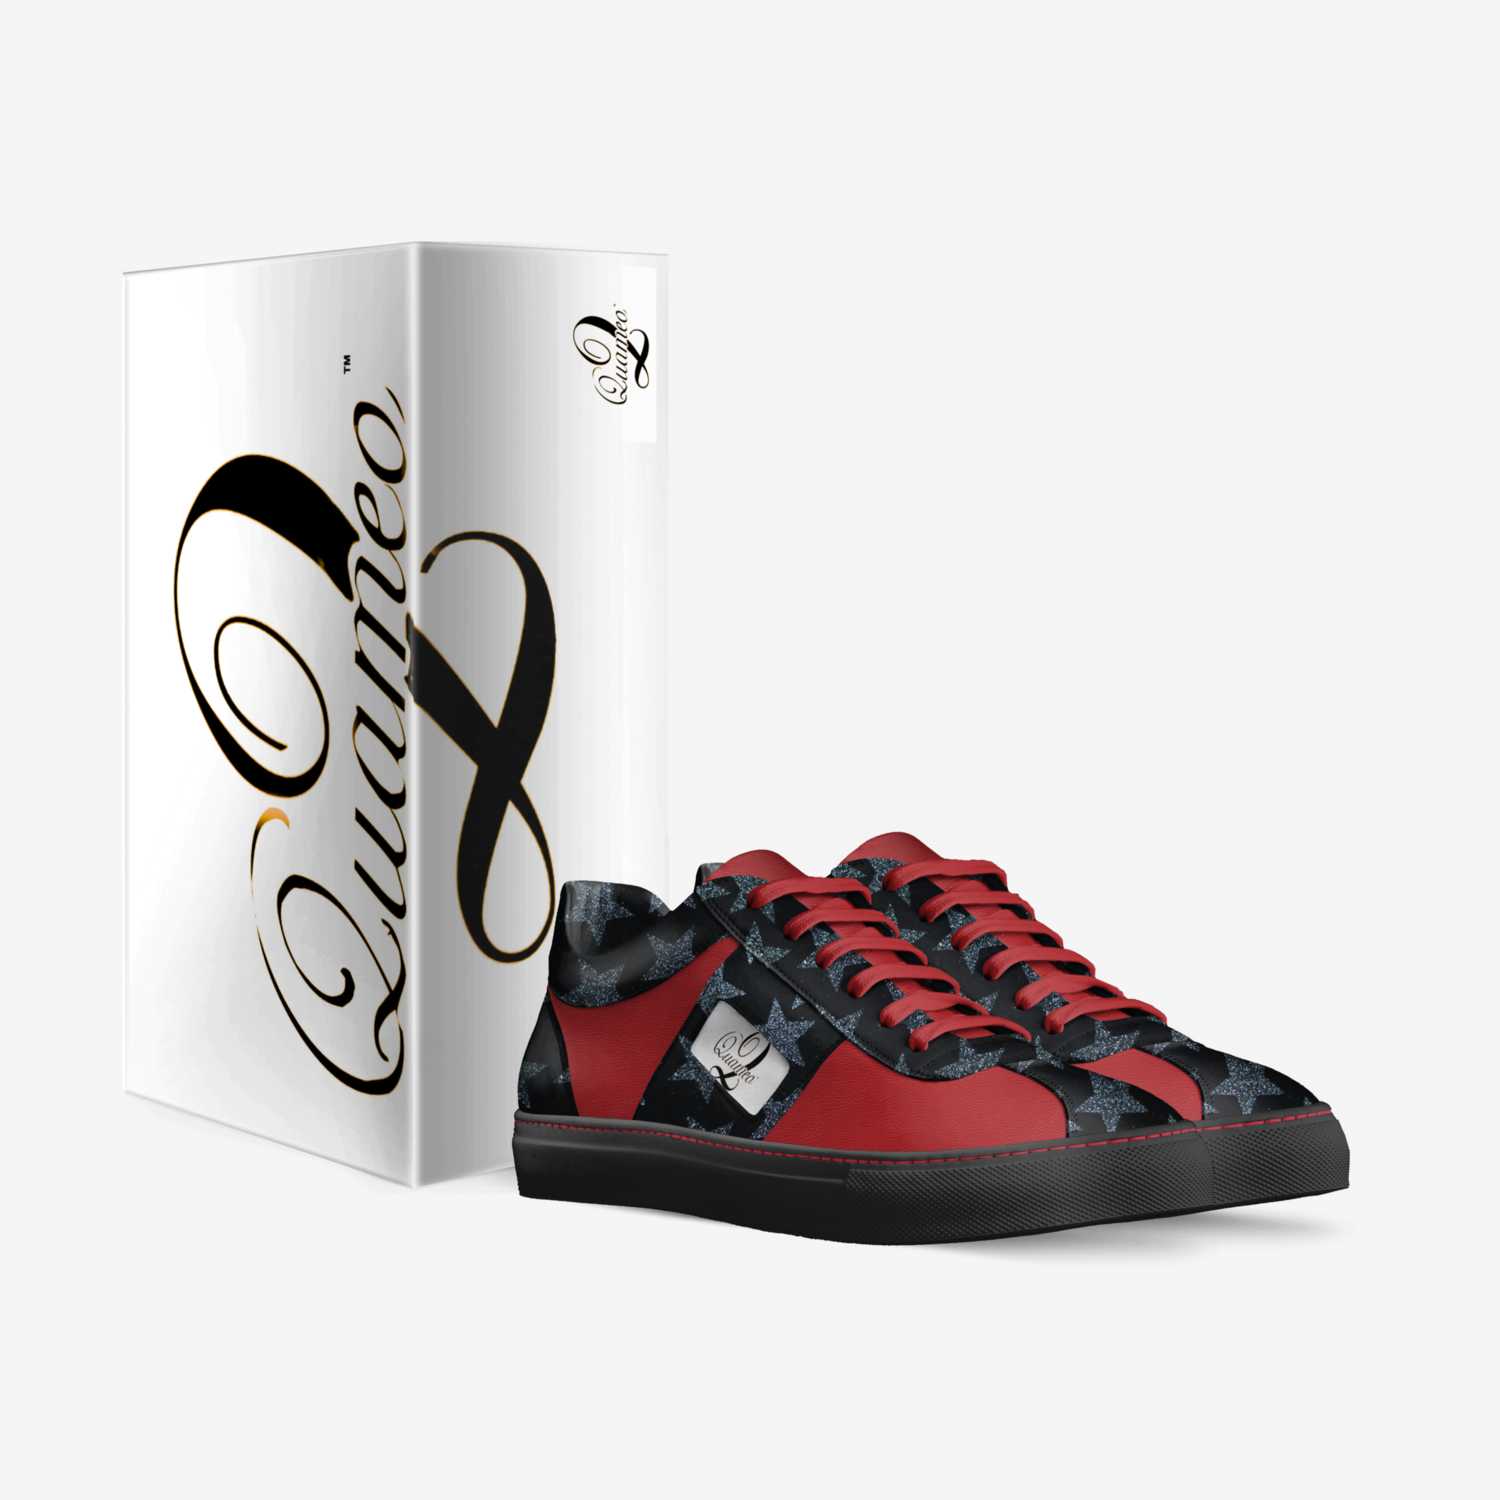 J.Quameo custom made in Italy shoes by Jeffery Robinson | Box view